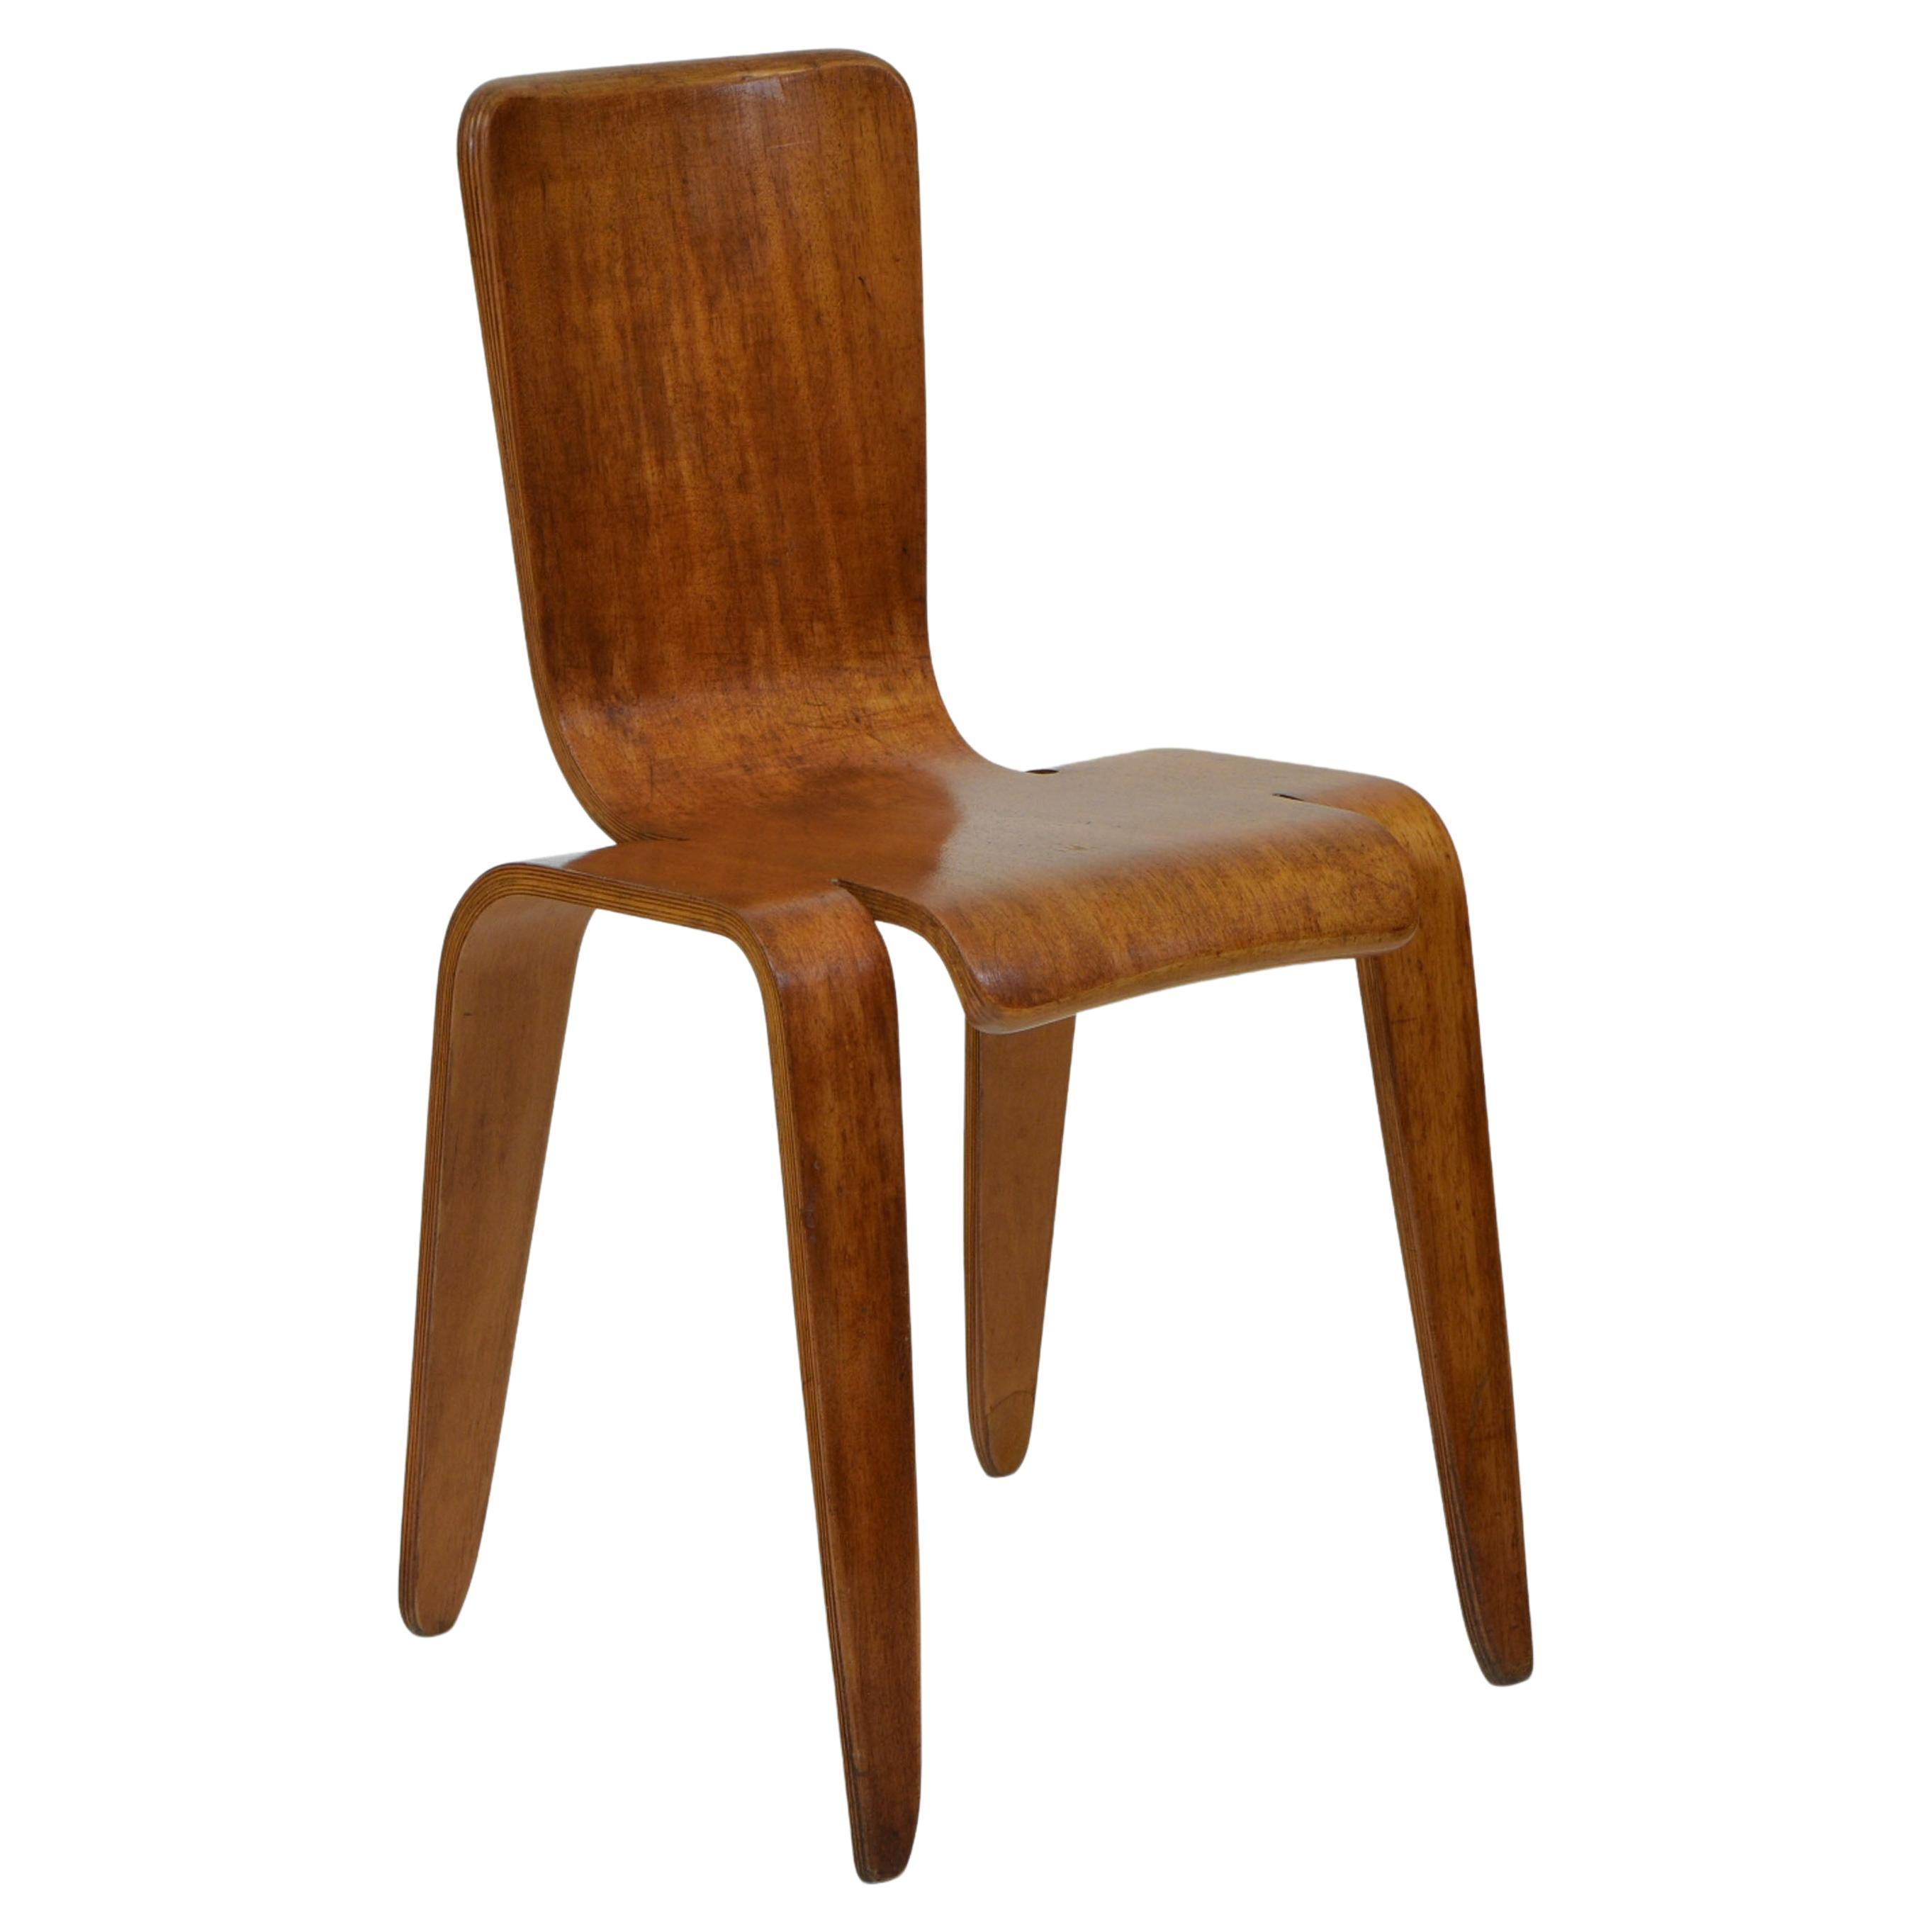 Rare Bambi Chair Designed by Han Pieck for Morris & Co Glasgow For Sale